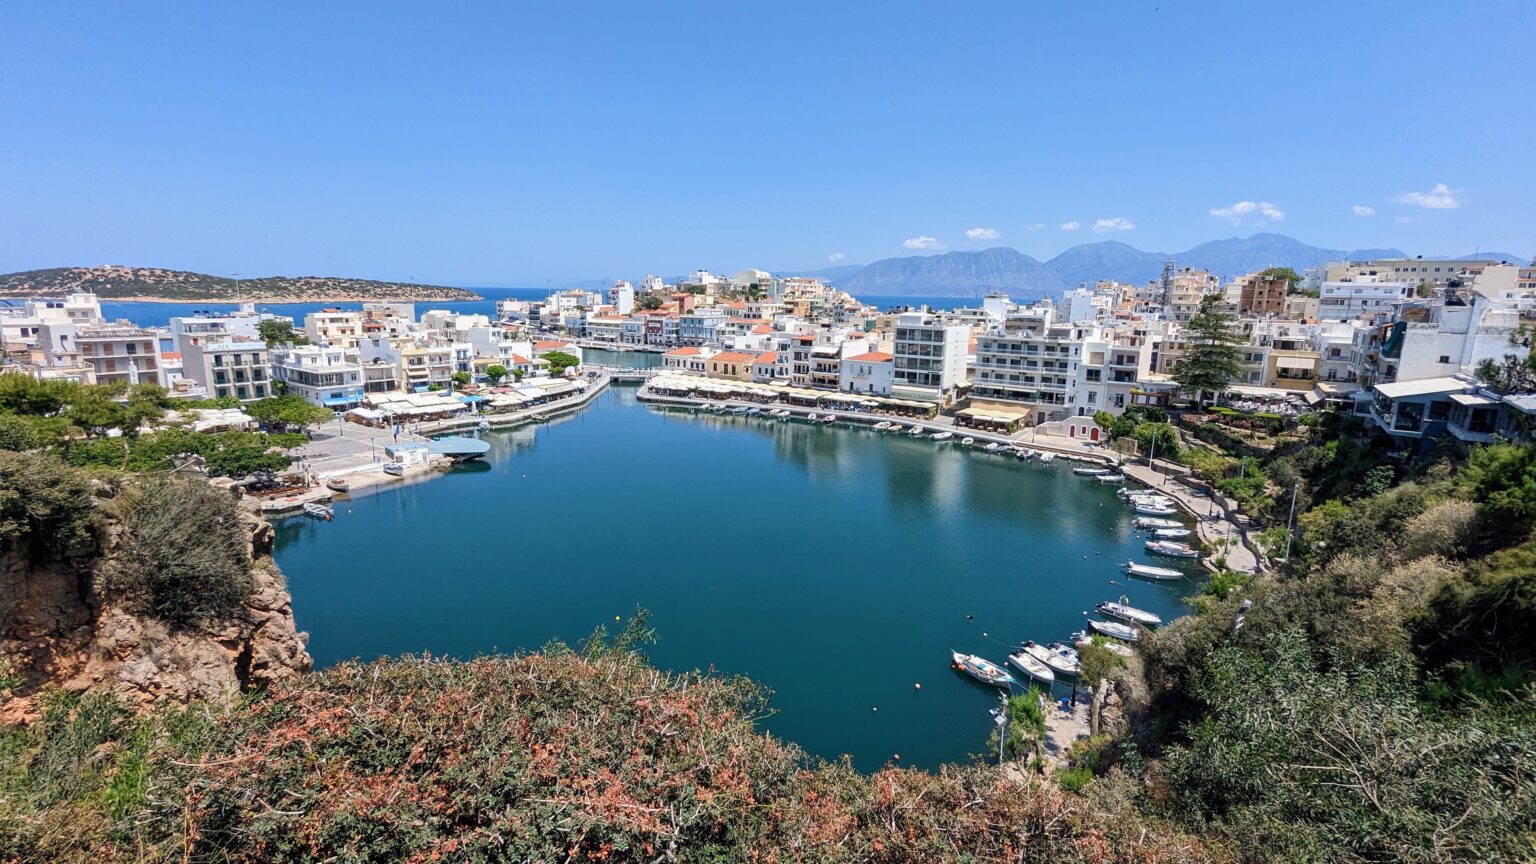 Lake Voulismeni in Agios Nikolaos, Crete, surrounded by white buildings and boats.